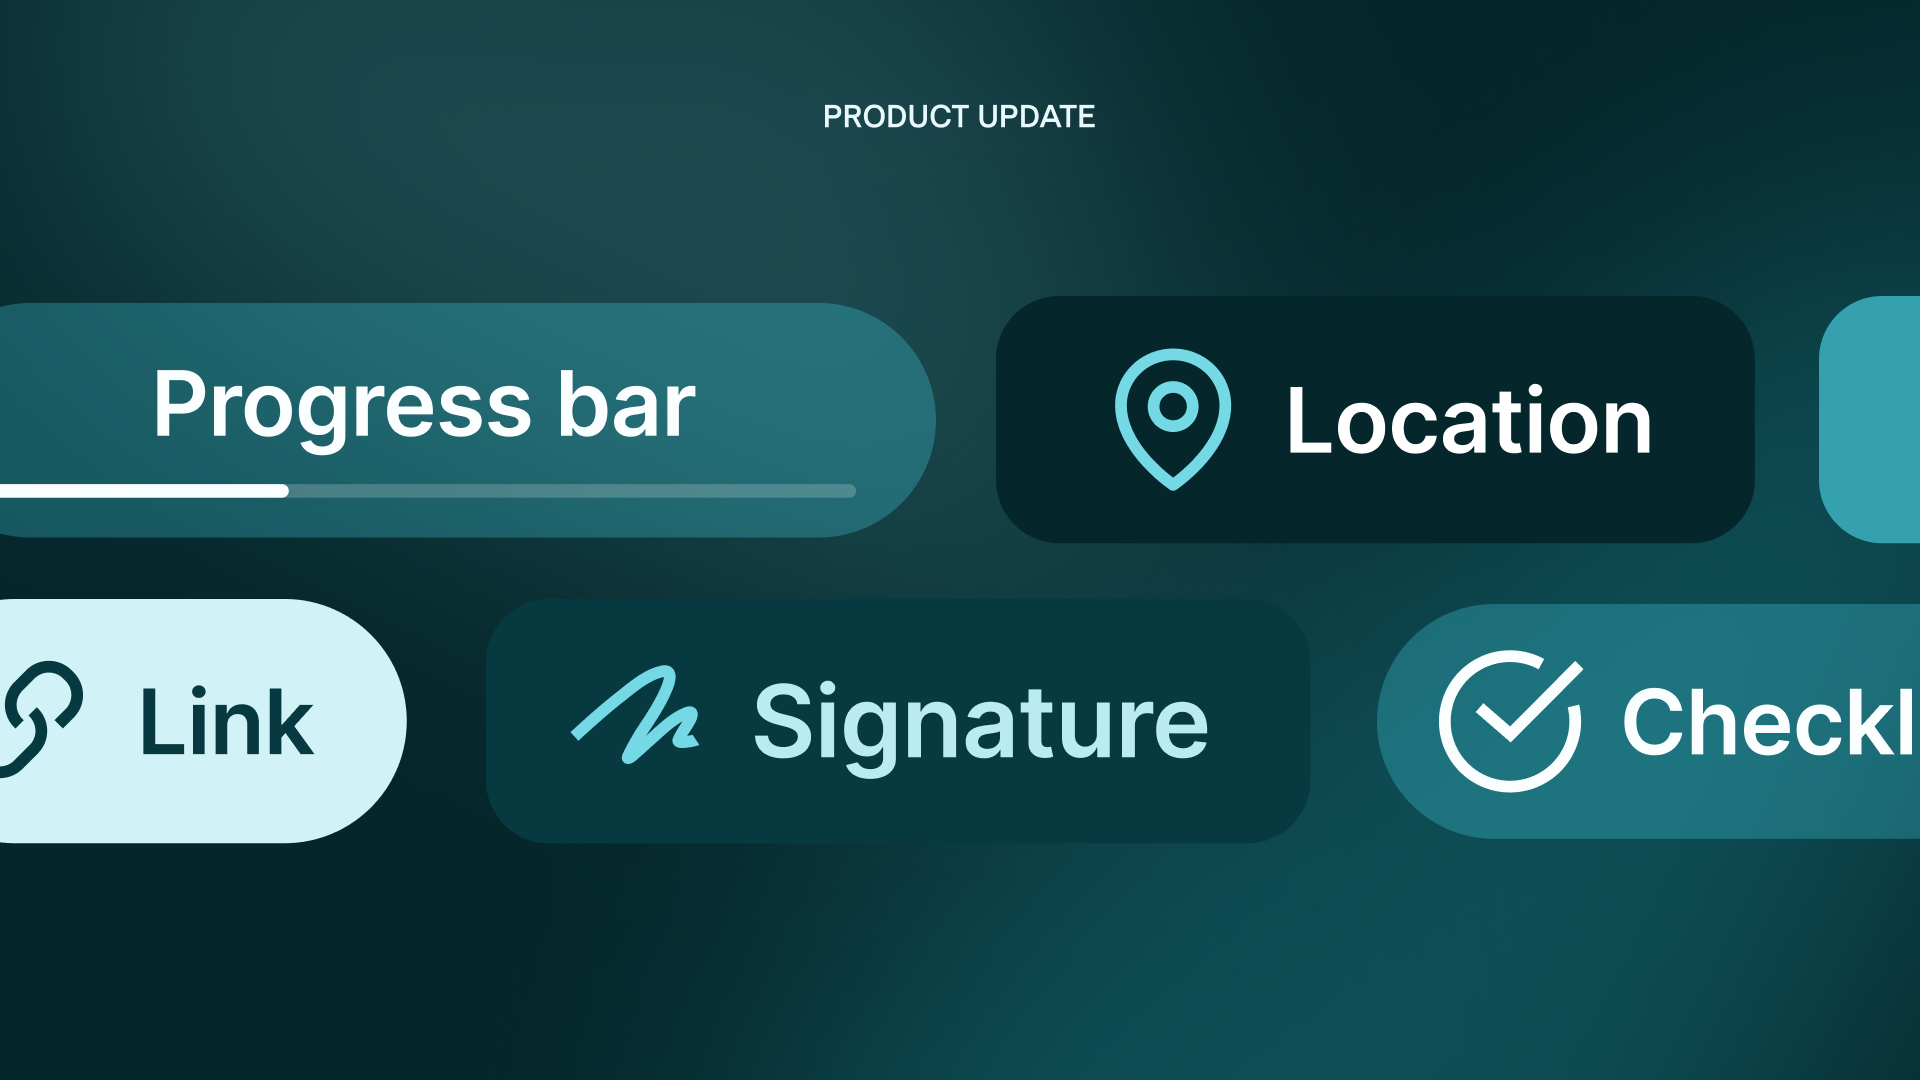 What’s New—Checklists, Location, Signature, Link, Progress Bar, and more